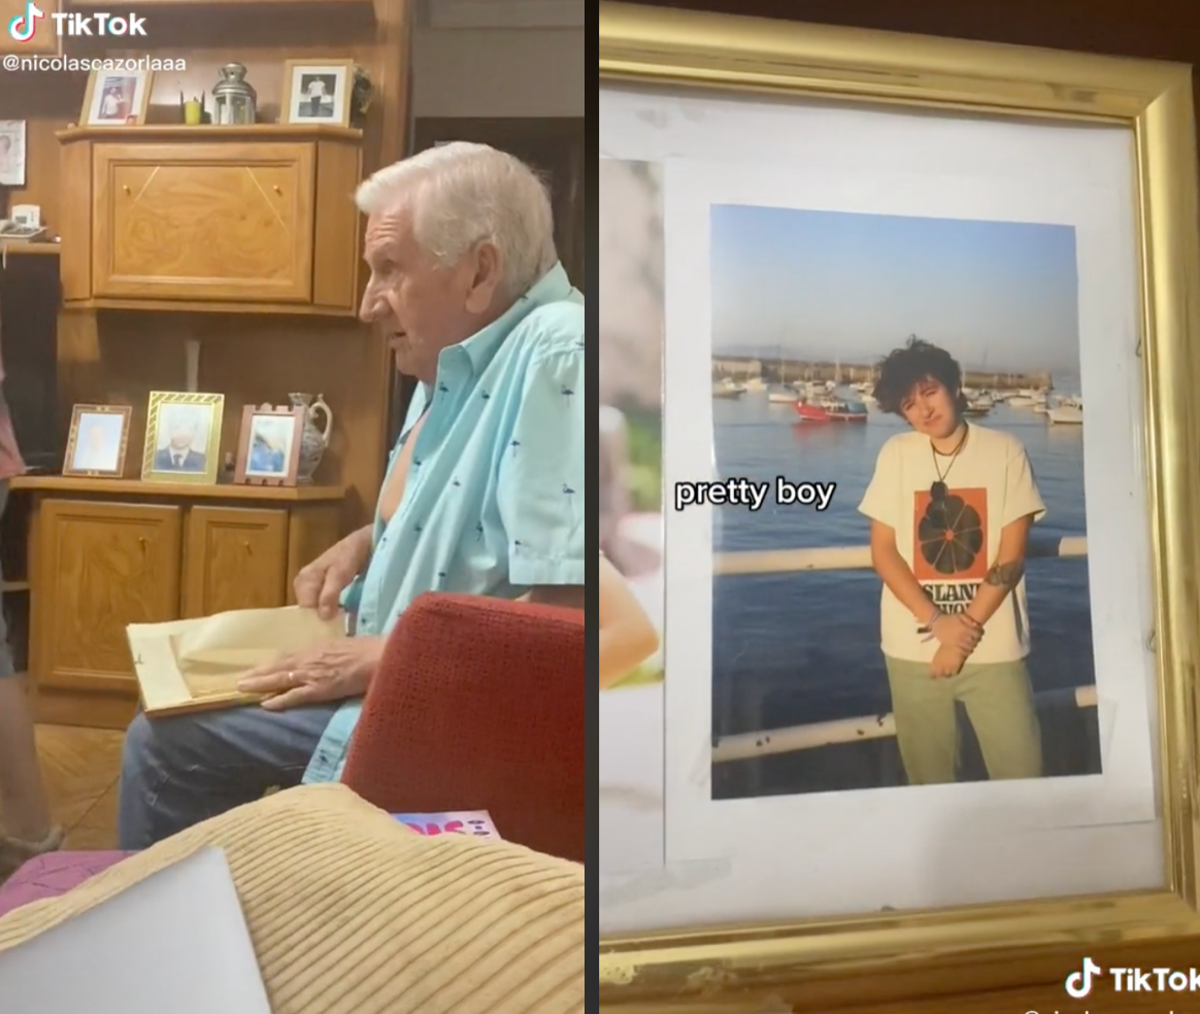 Man shares emotional moment with grandfather after he updated photo to represent grandson’s transition